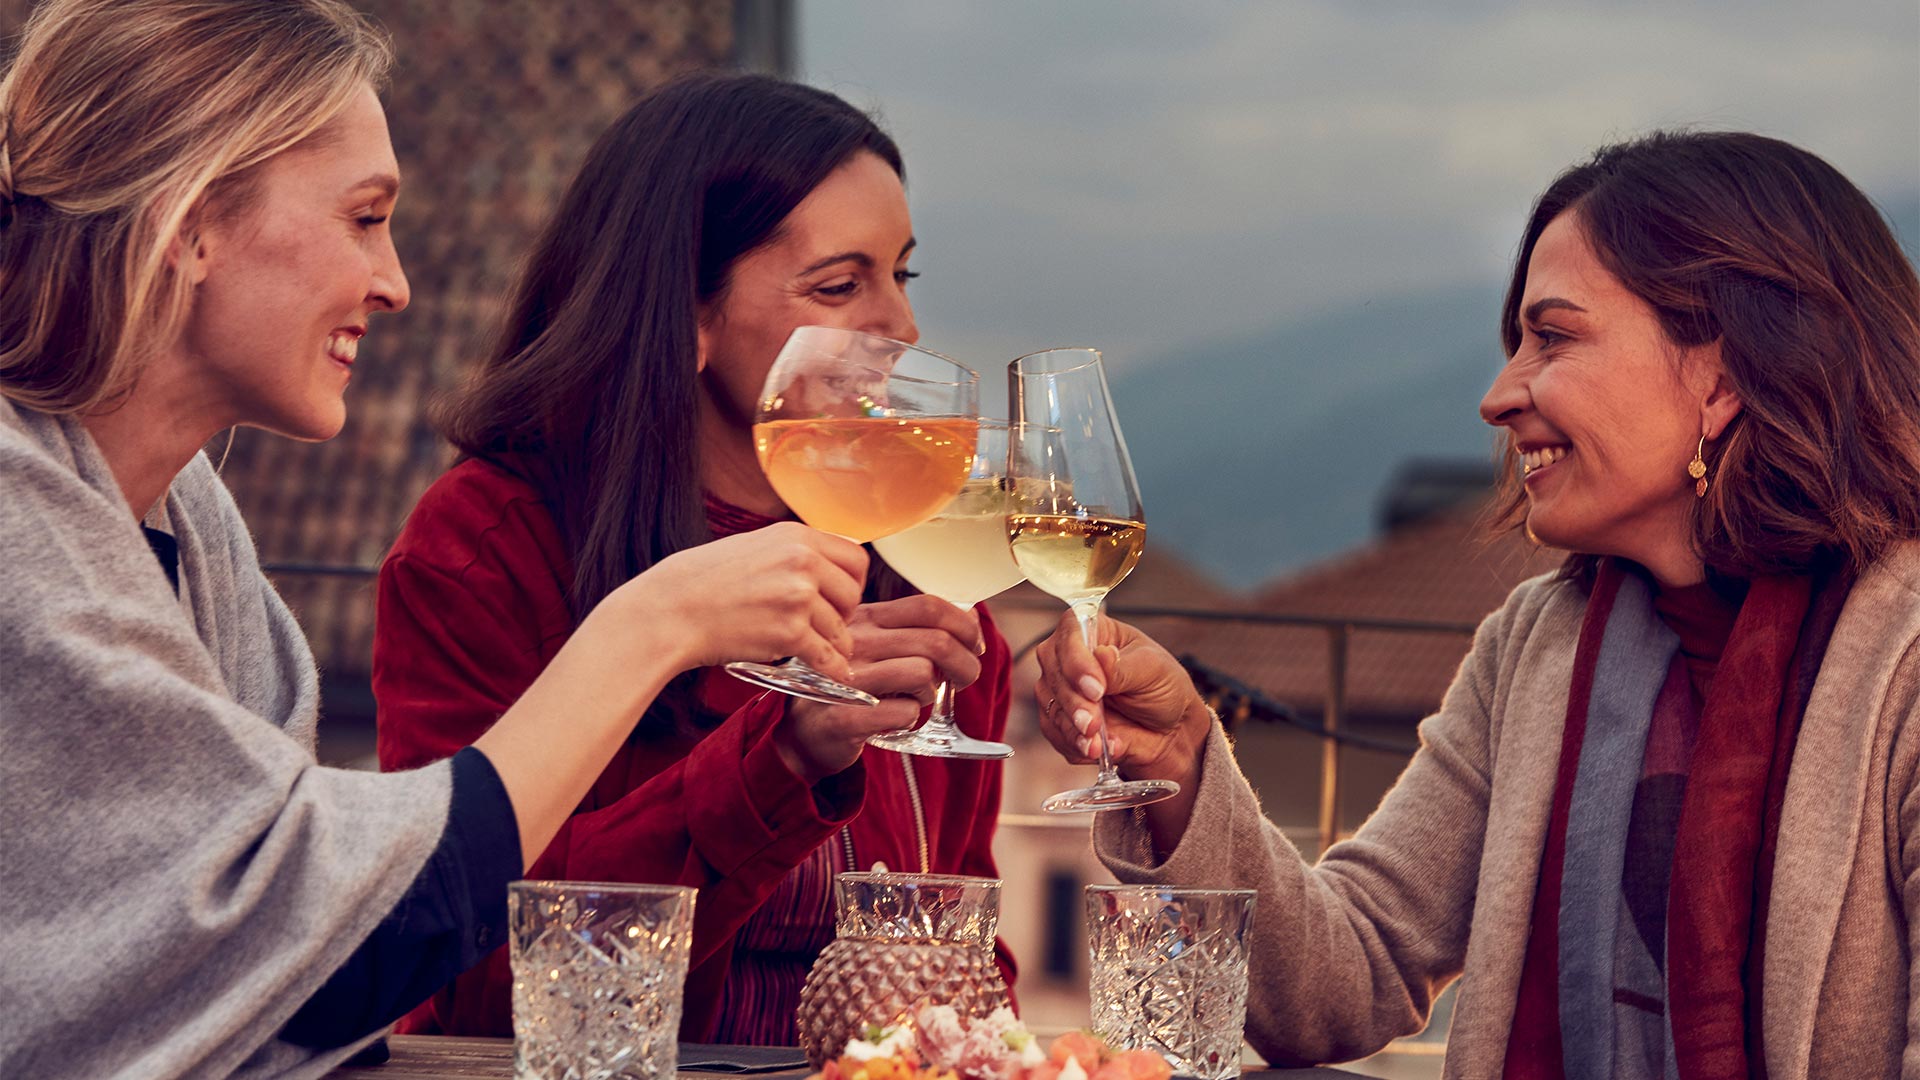 In the evening, three friends sitting at a table in an open-air restaurant make a toast with glasses of white wine.